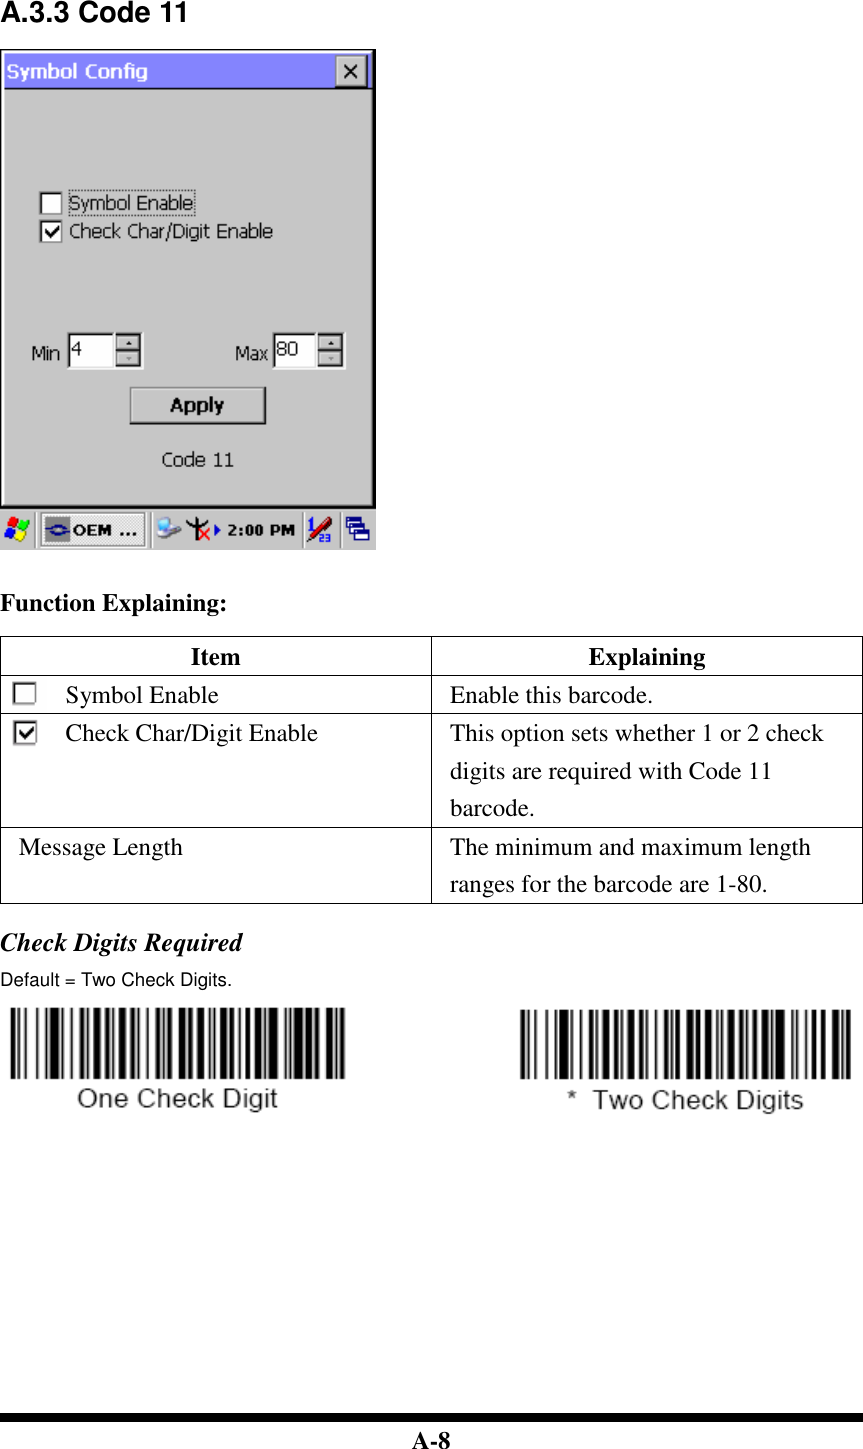  A-8   A.3.3 Code 11     Function Explaining:  Item  Explaining Symbol Enable  Enable this barcode. Check Char/Digit Enable  This option sets whether 1 or 2 check digits are required with Code 11 barcode. Message Length  The minimum and maximum length ranges for the barcode are 1-80.  Check Digits Required Default = Two Check Digits.                                    